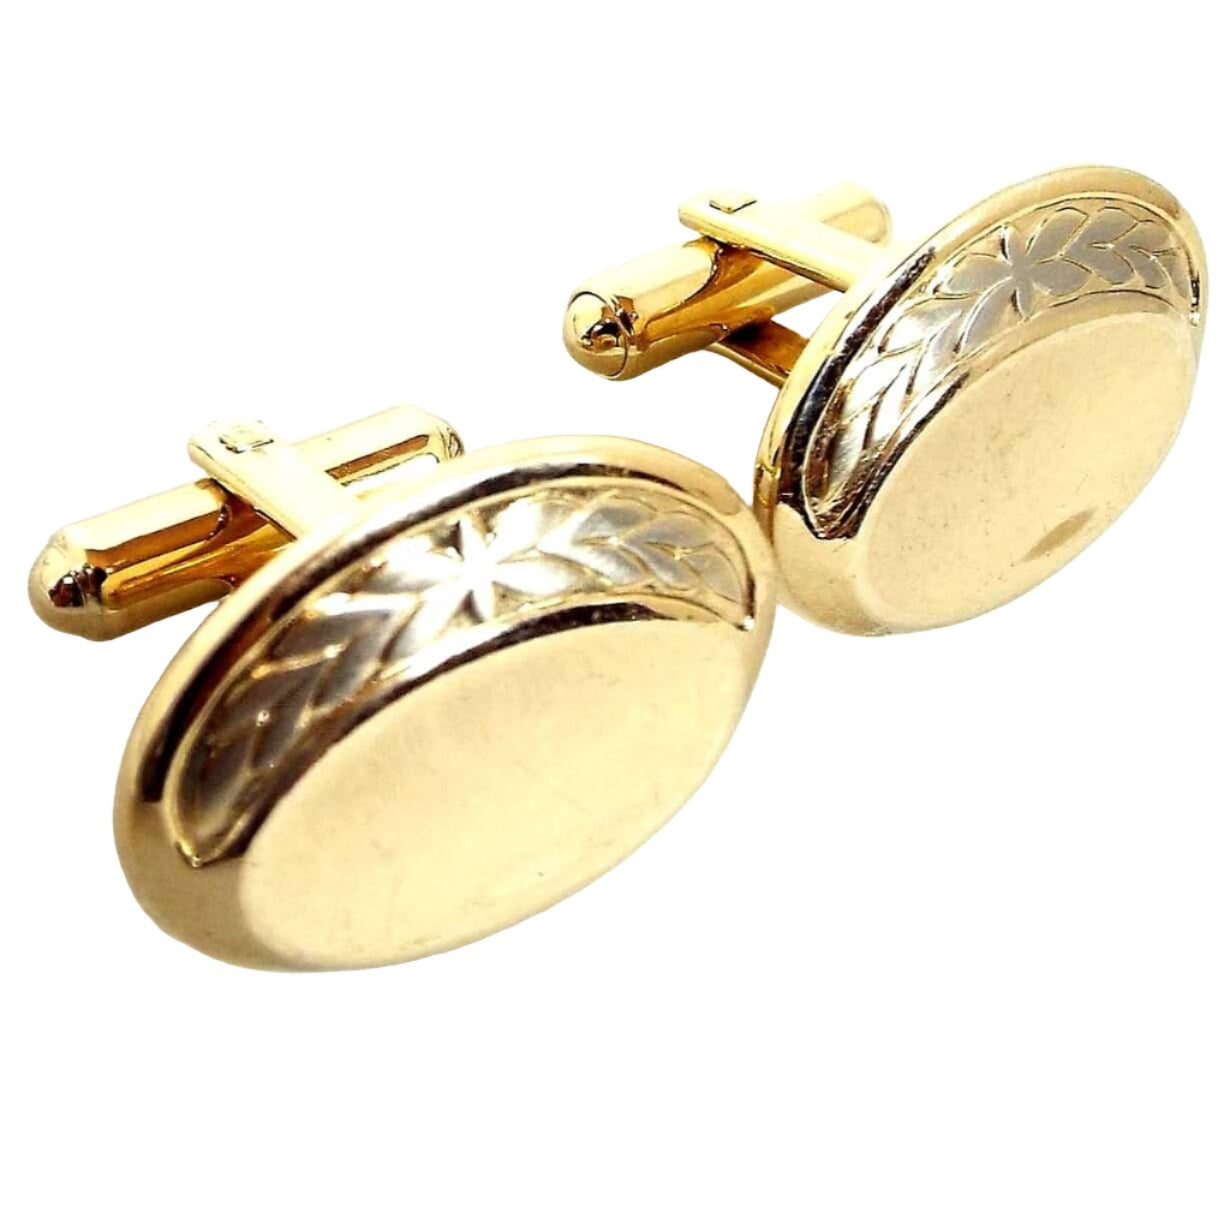 Angled front view of the retro vintage Hickok cufflinks. They are oval in shape and mostly gold tone in color. There is a silver tone leaf design around the top edge.